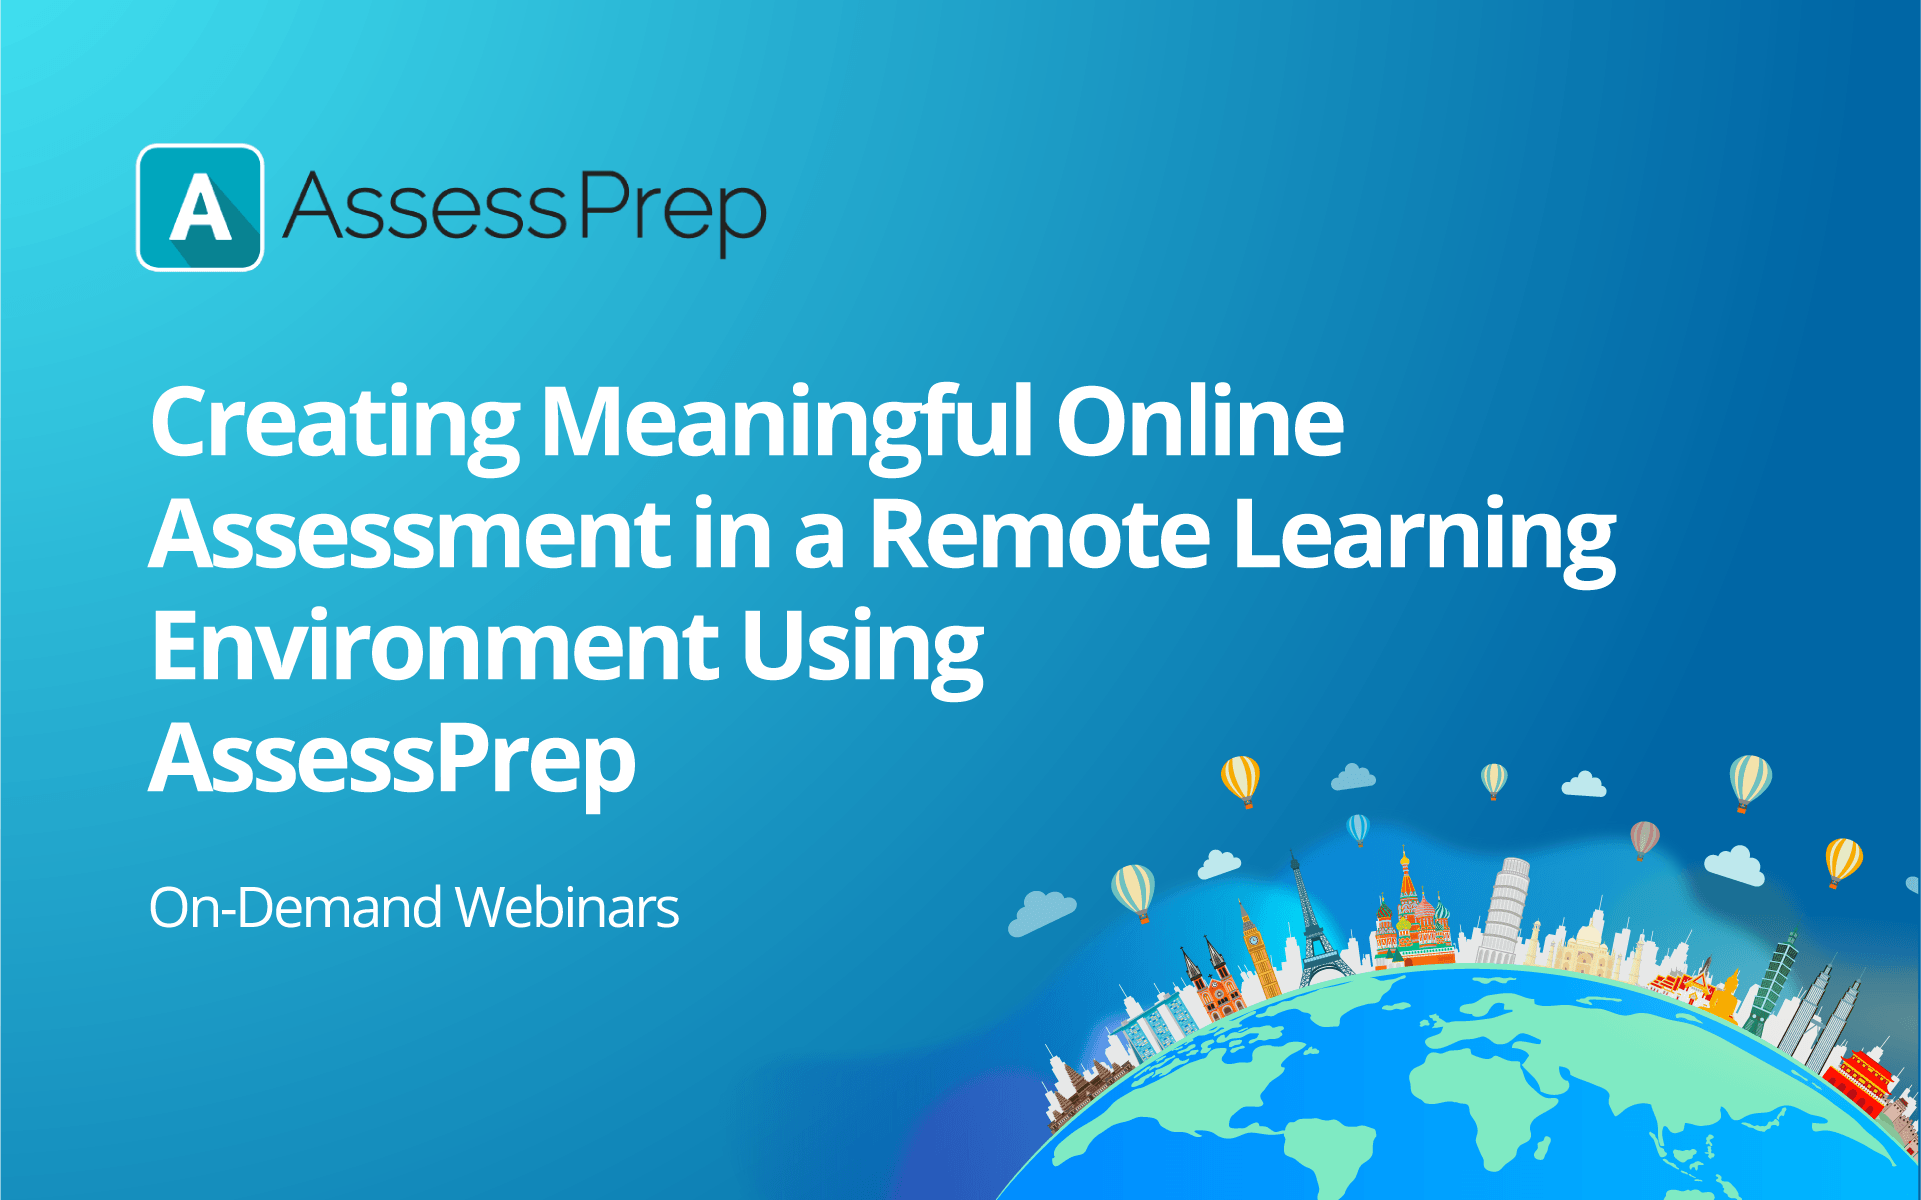 Creating Meaningful Online Assessments in a Remote Learning Environment Using AssessPrep